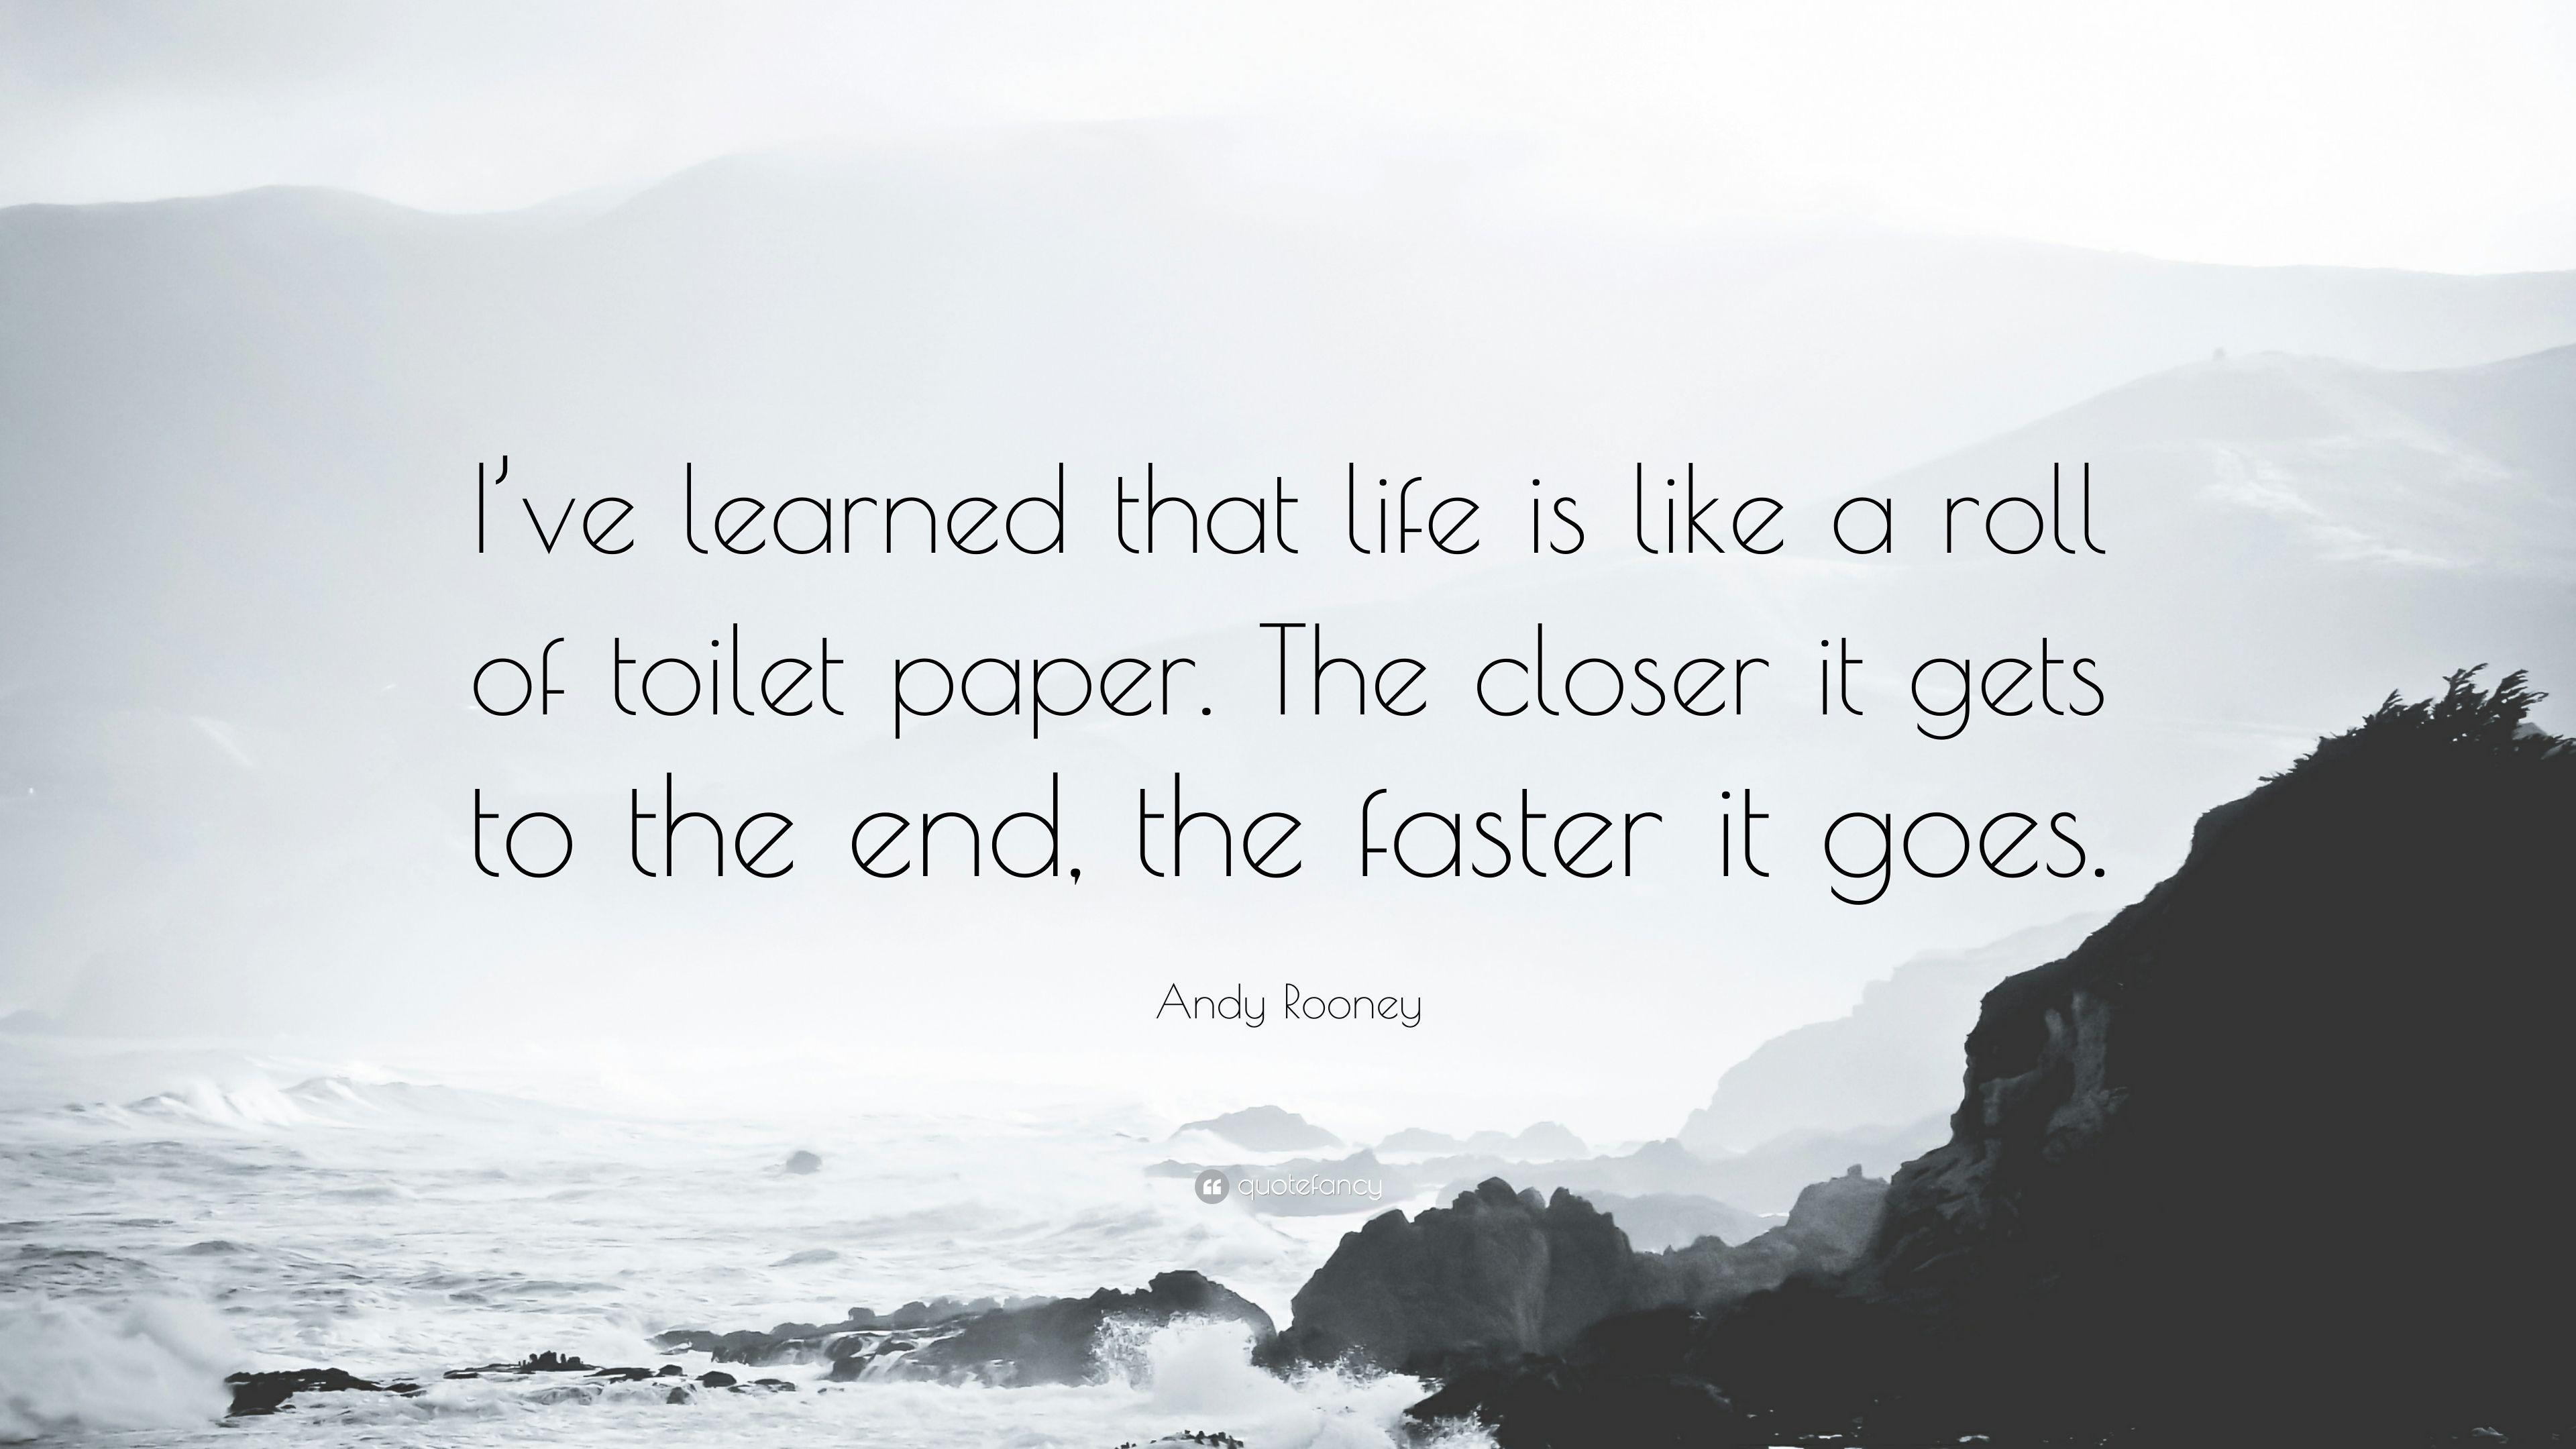 Andy Rooney Quote: “I've learned that life is like a roll of toilet